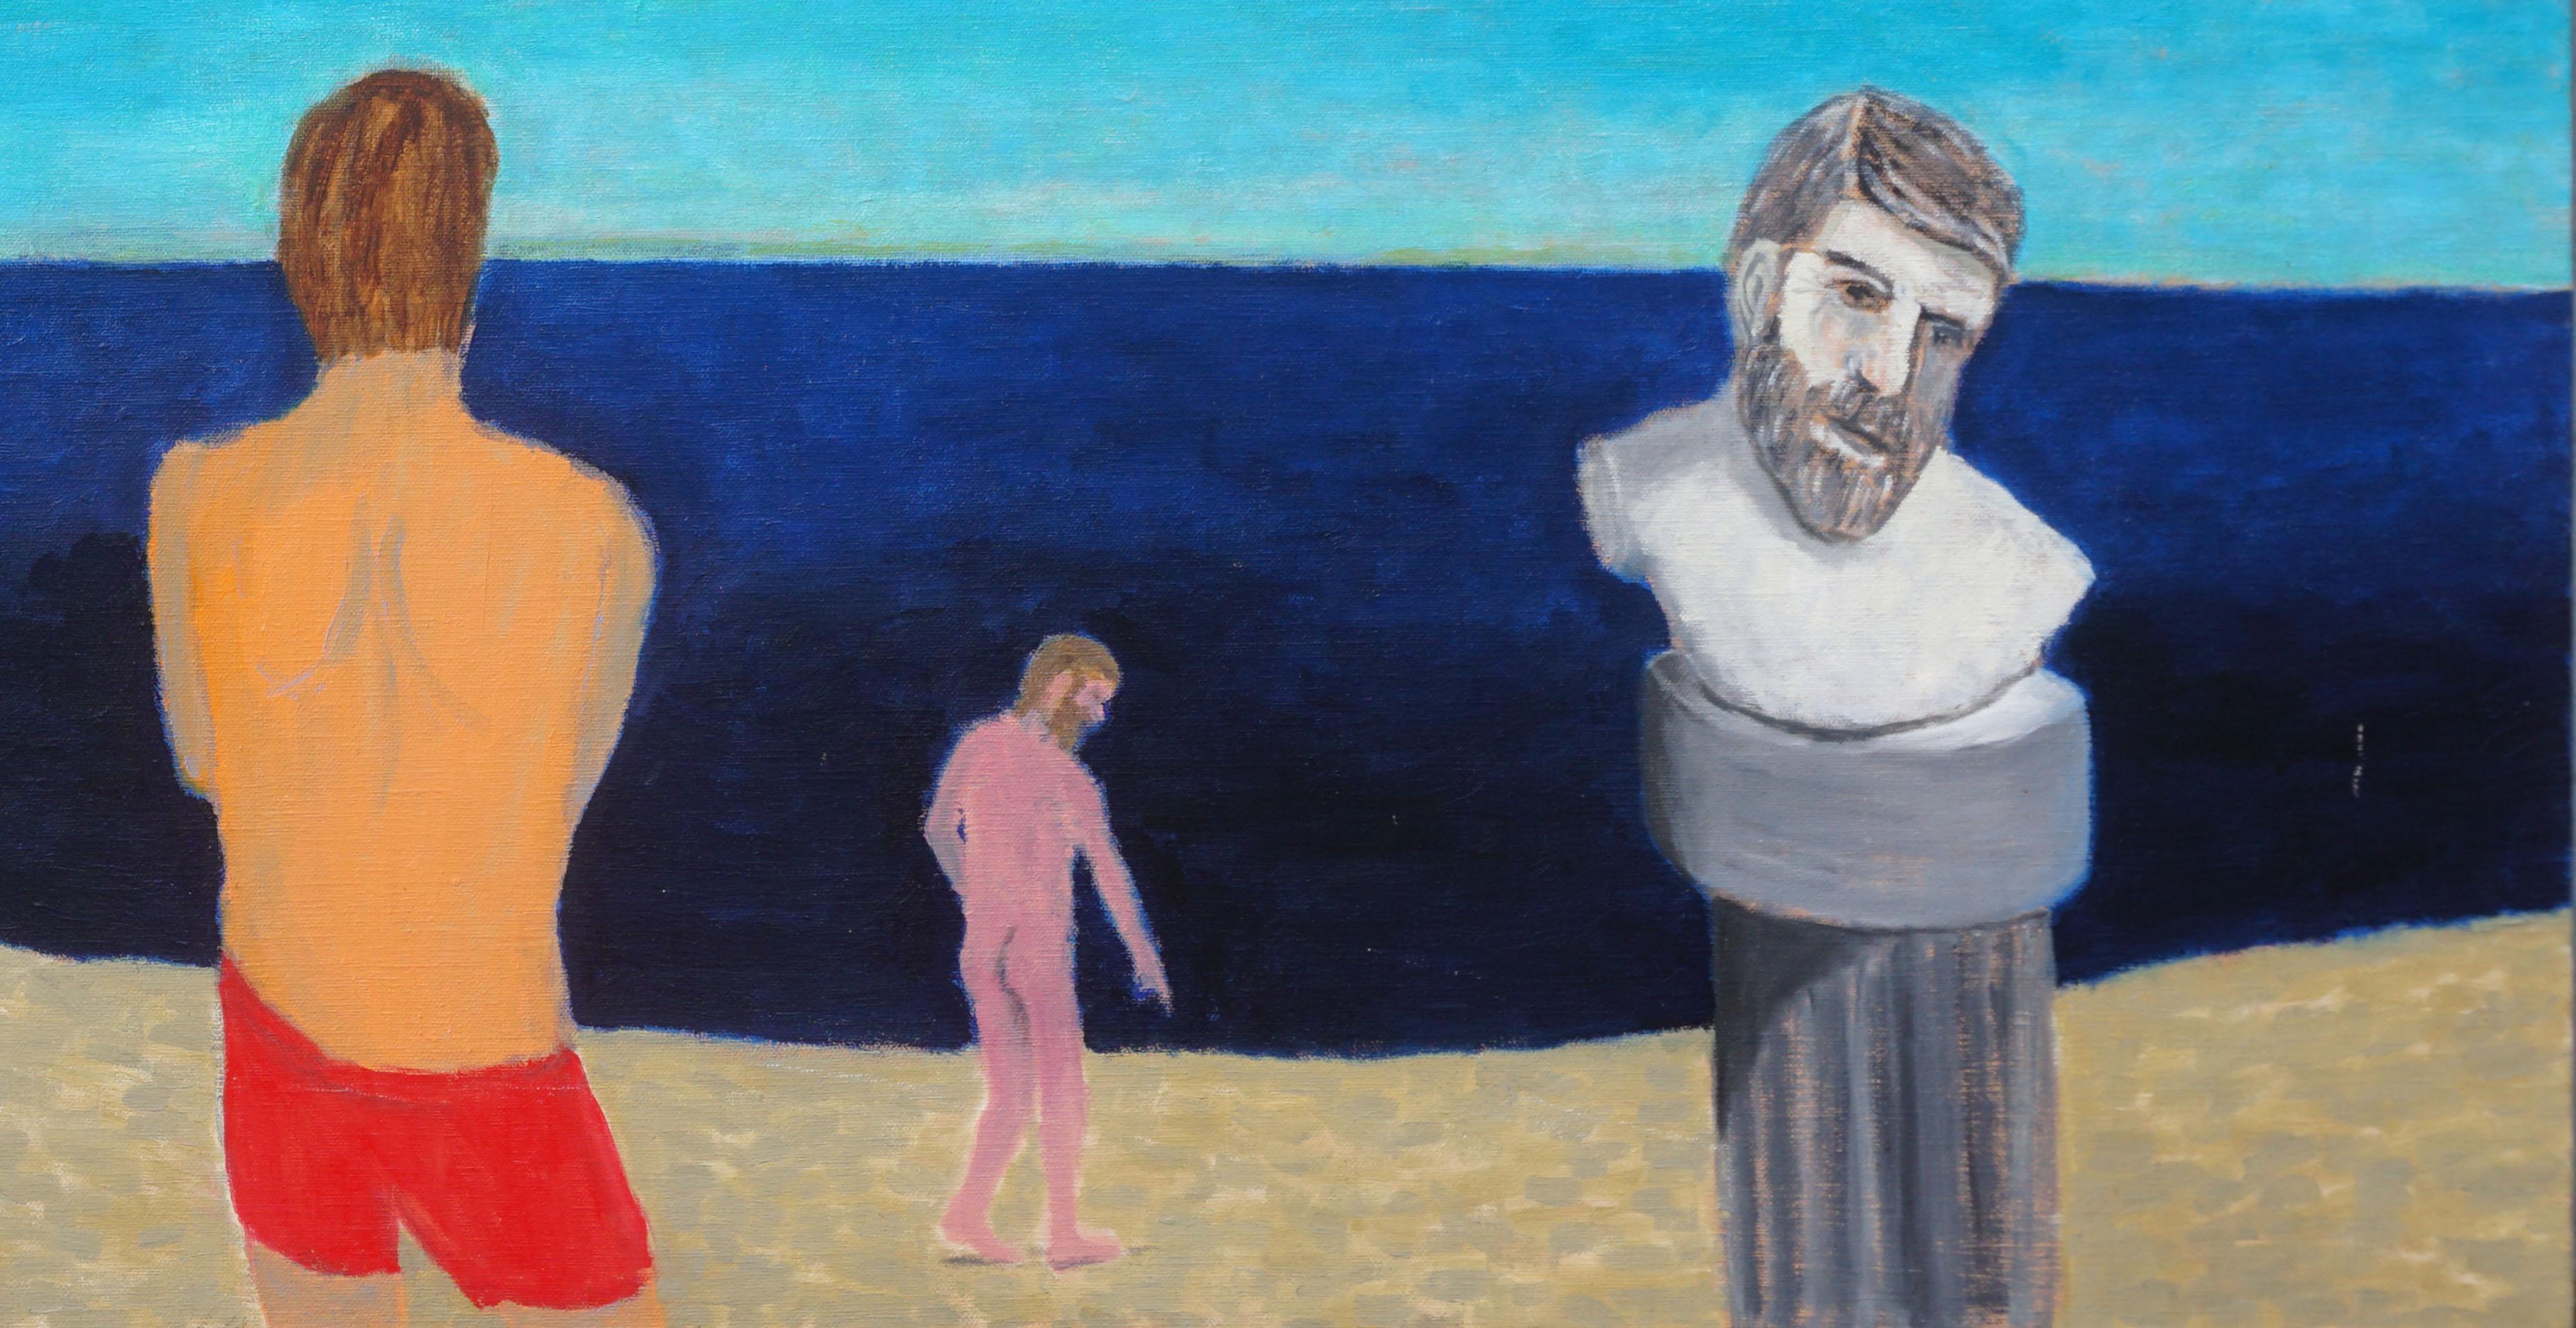 Figures on the Beach with Sculpture, Contemporary Surreal Figural Landscape - Painting by Michael Pauker 